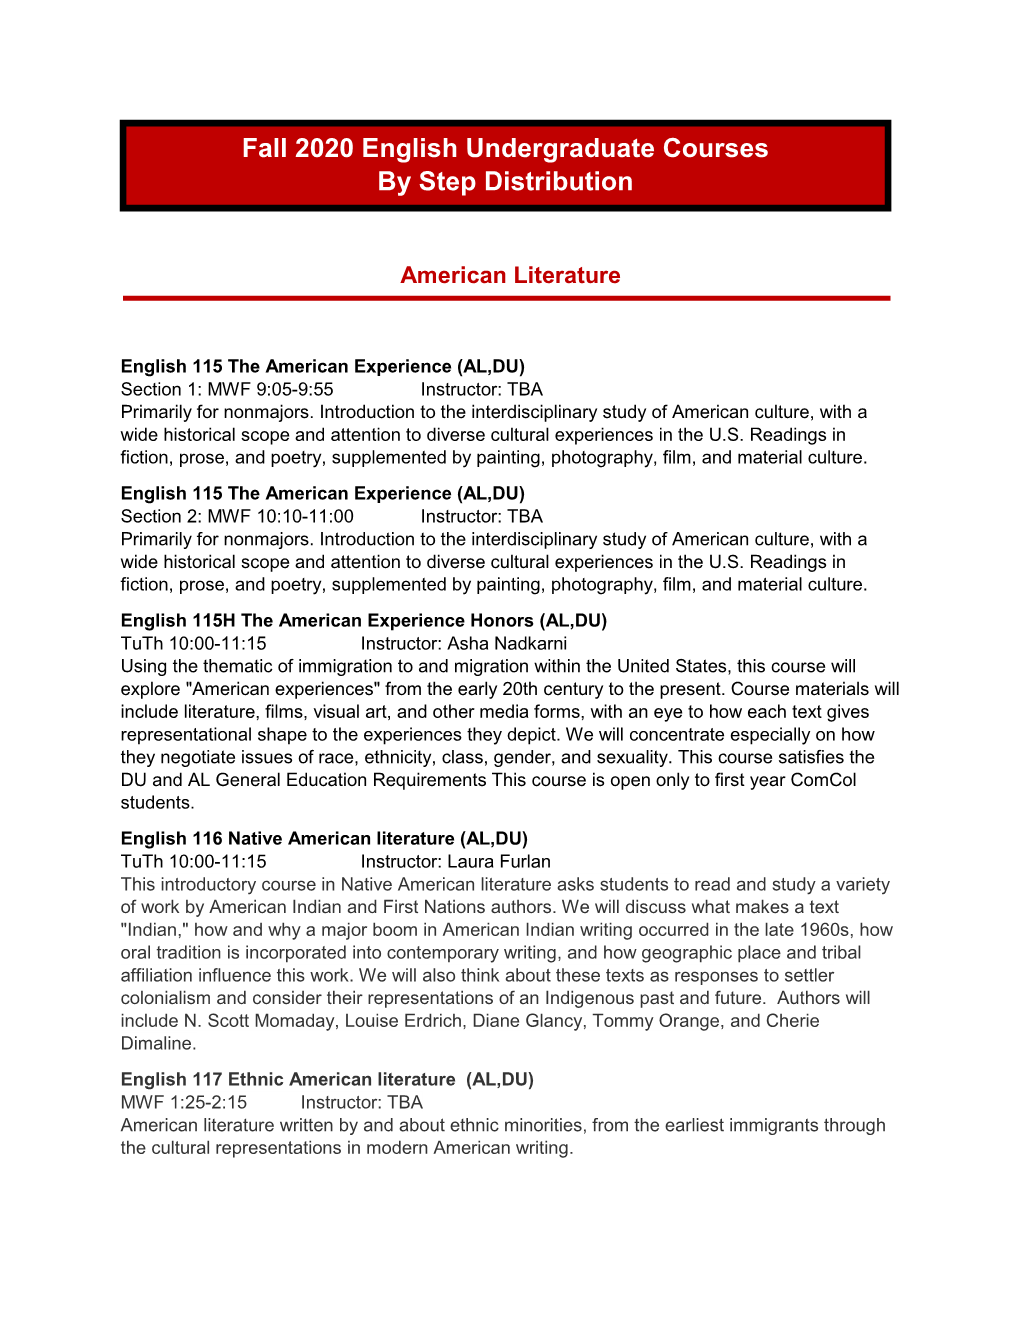 Fall 2020 English Undergraduate Courses by Step Distribution